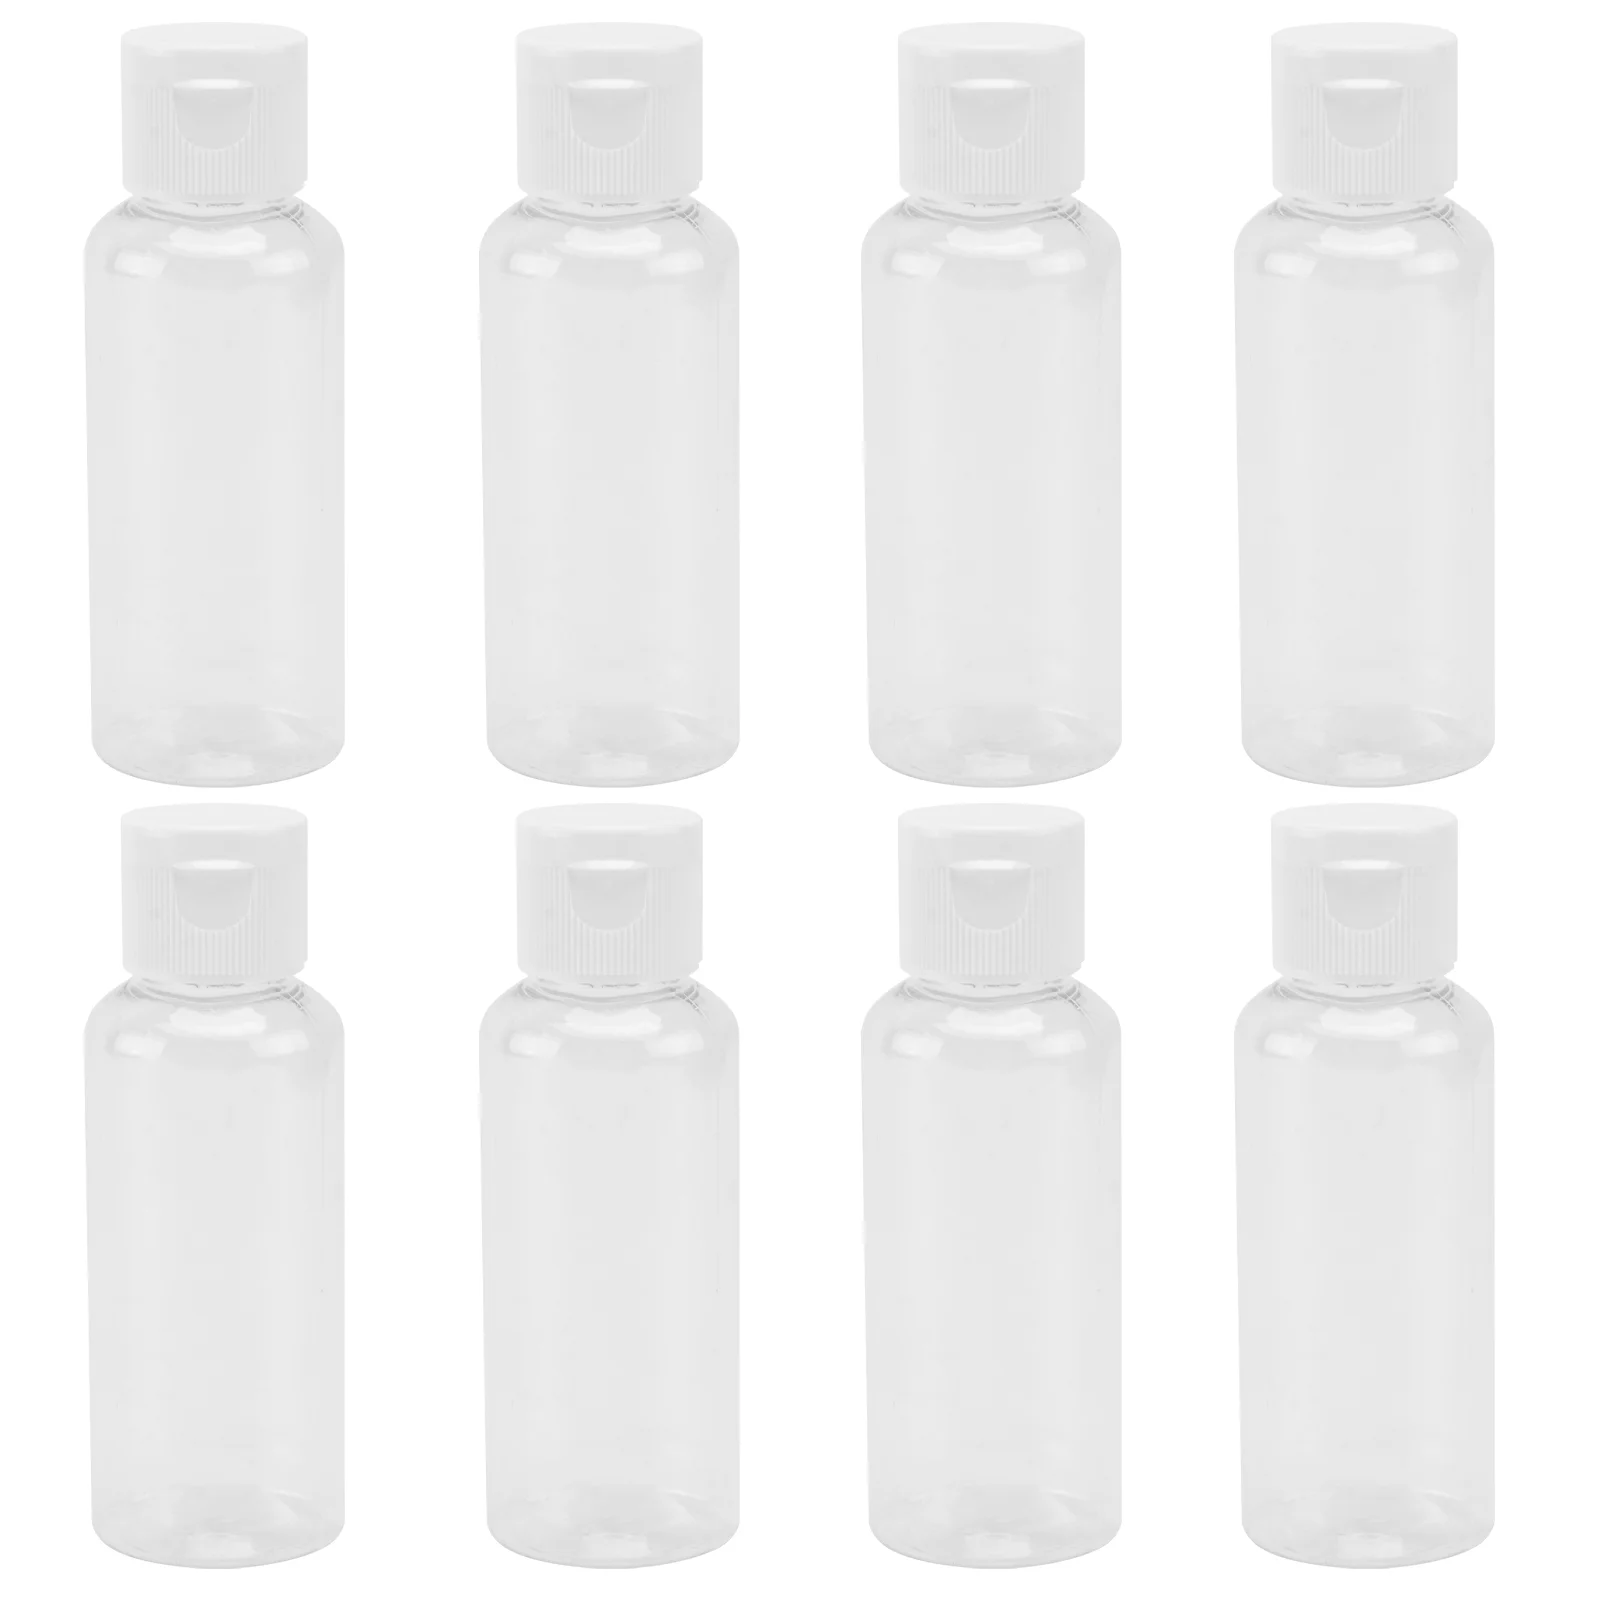 

Containers Travel Empty Bottles Lids Cream Makeup Sample Lotions Jar Bottle Creams Size Cap Fillable Lotion Shampoo Clear